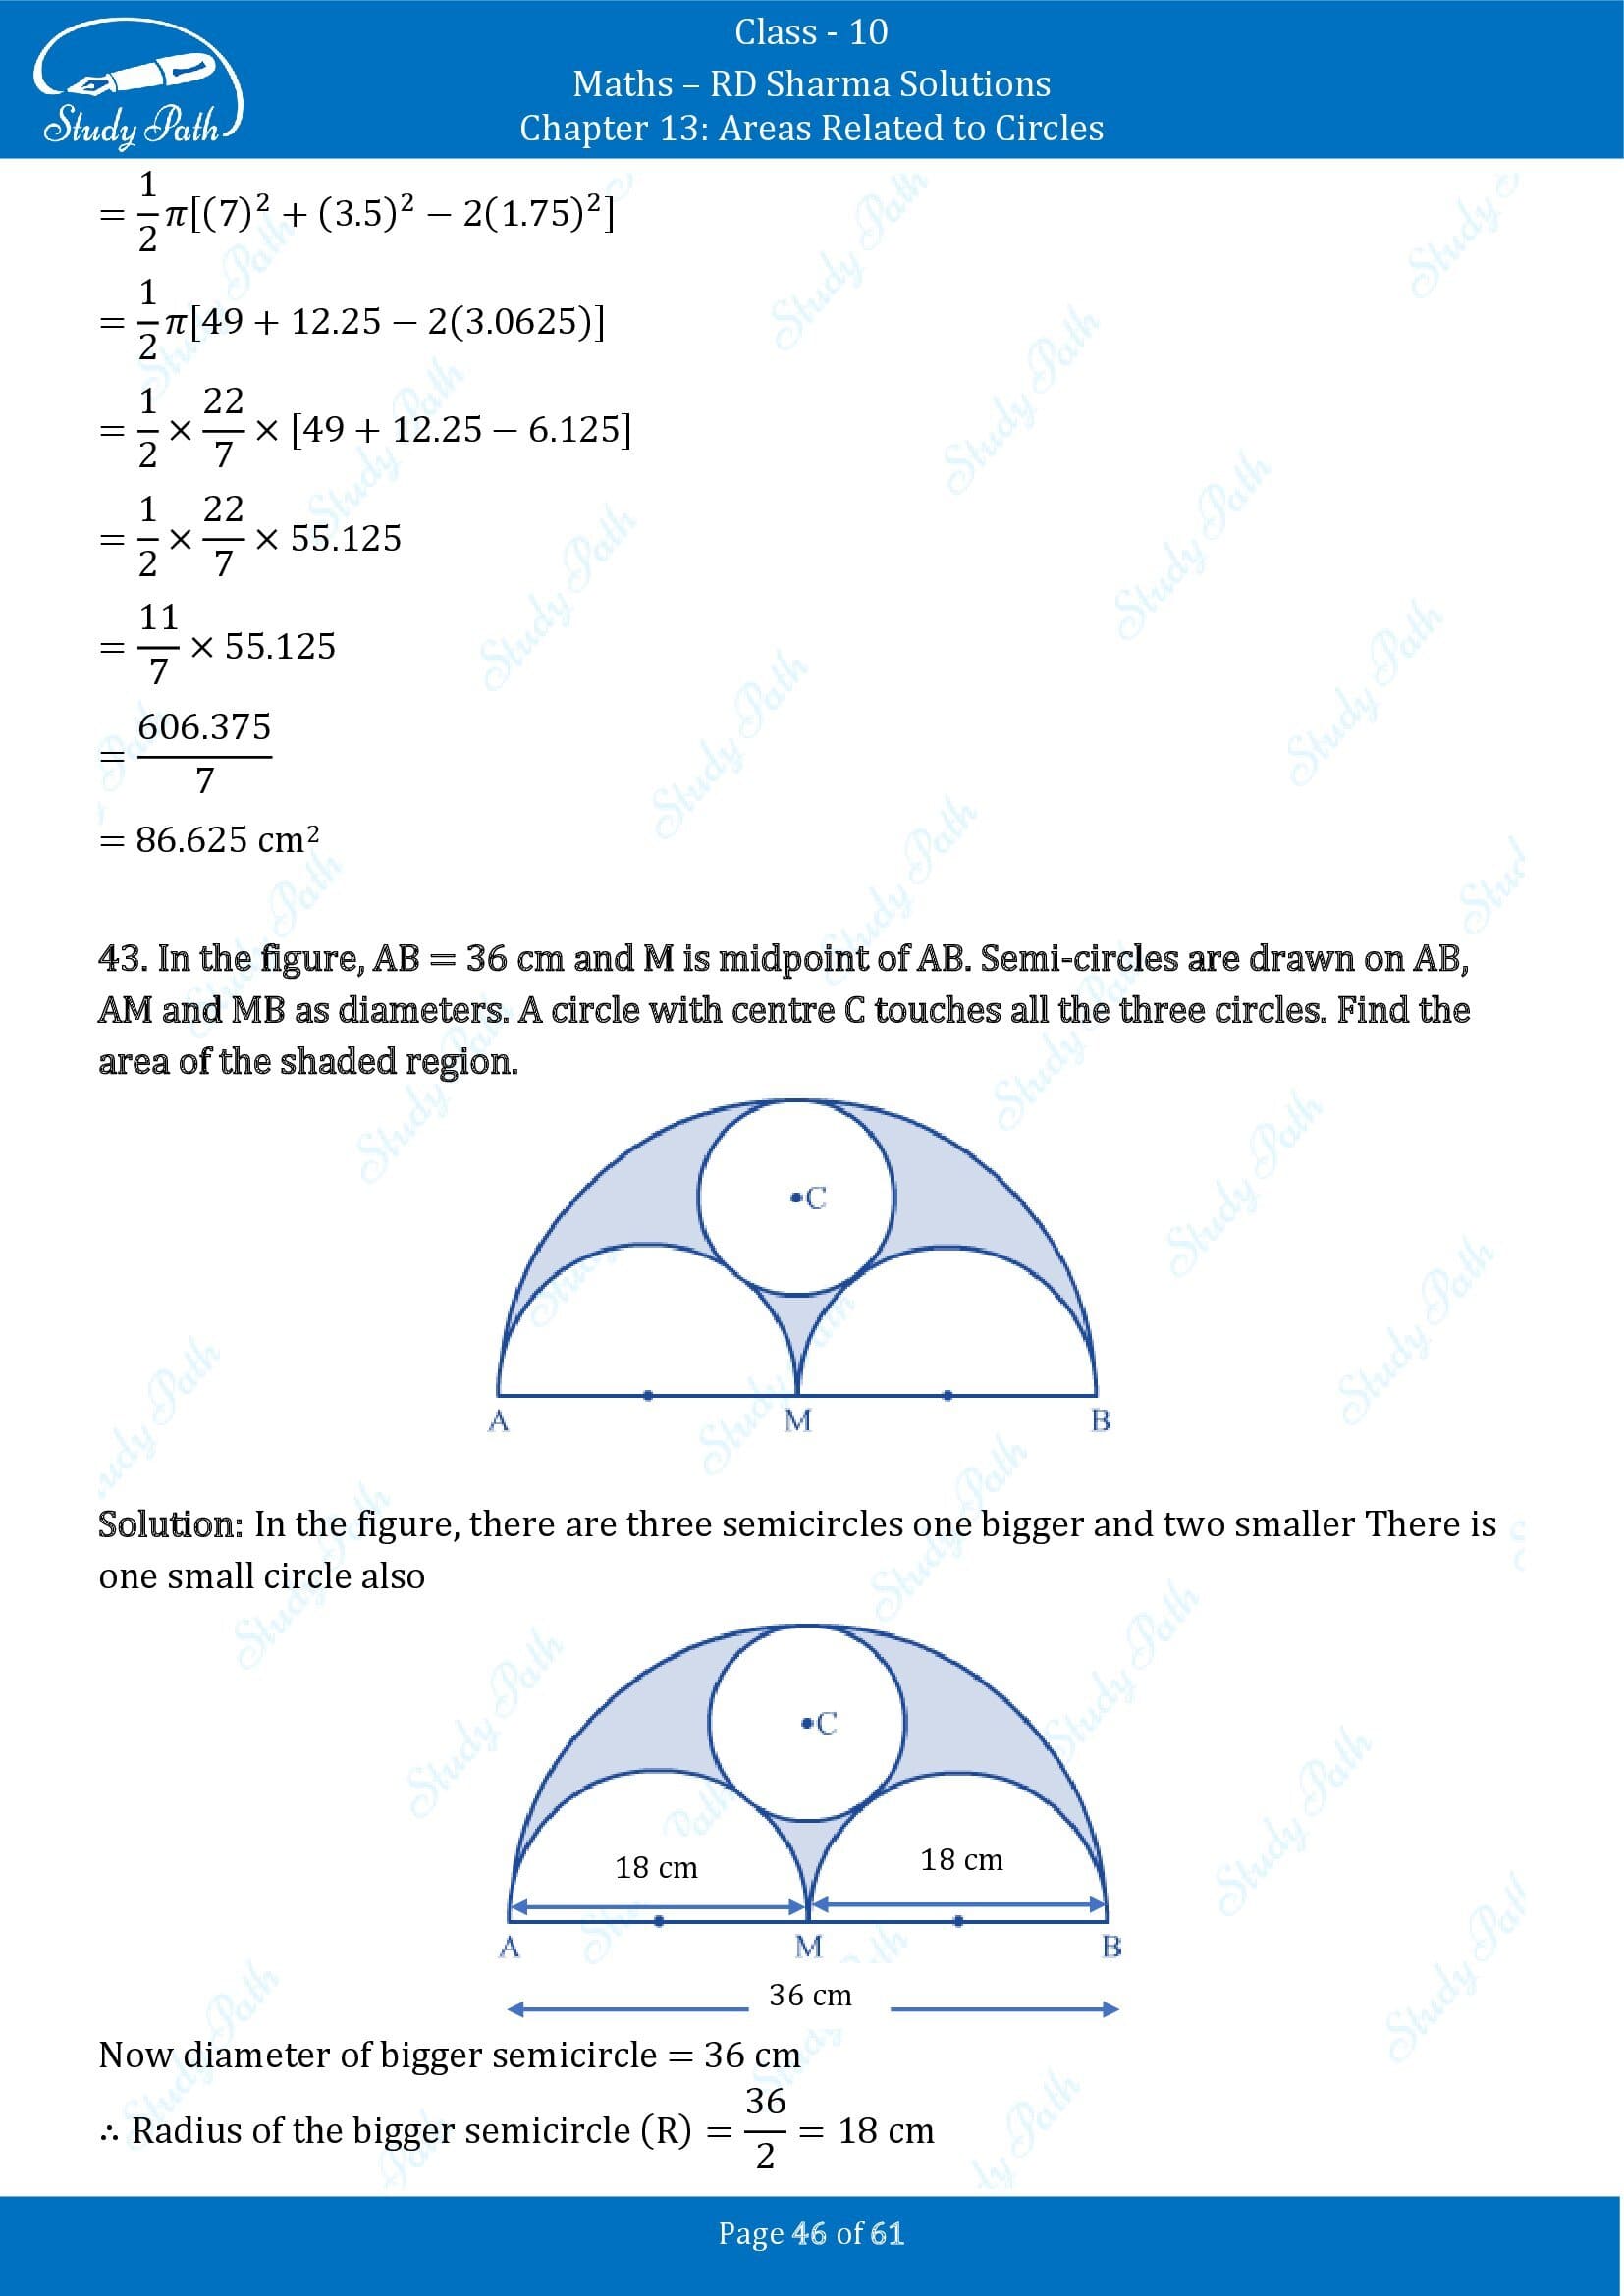 RD Sharma Solutions Class 10 Chapter 13 Areas Related to Circles Exercise 13.4 00046